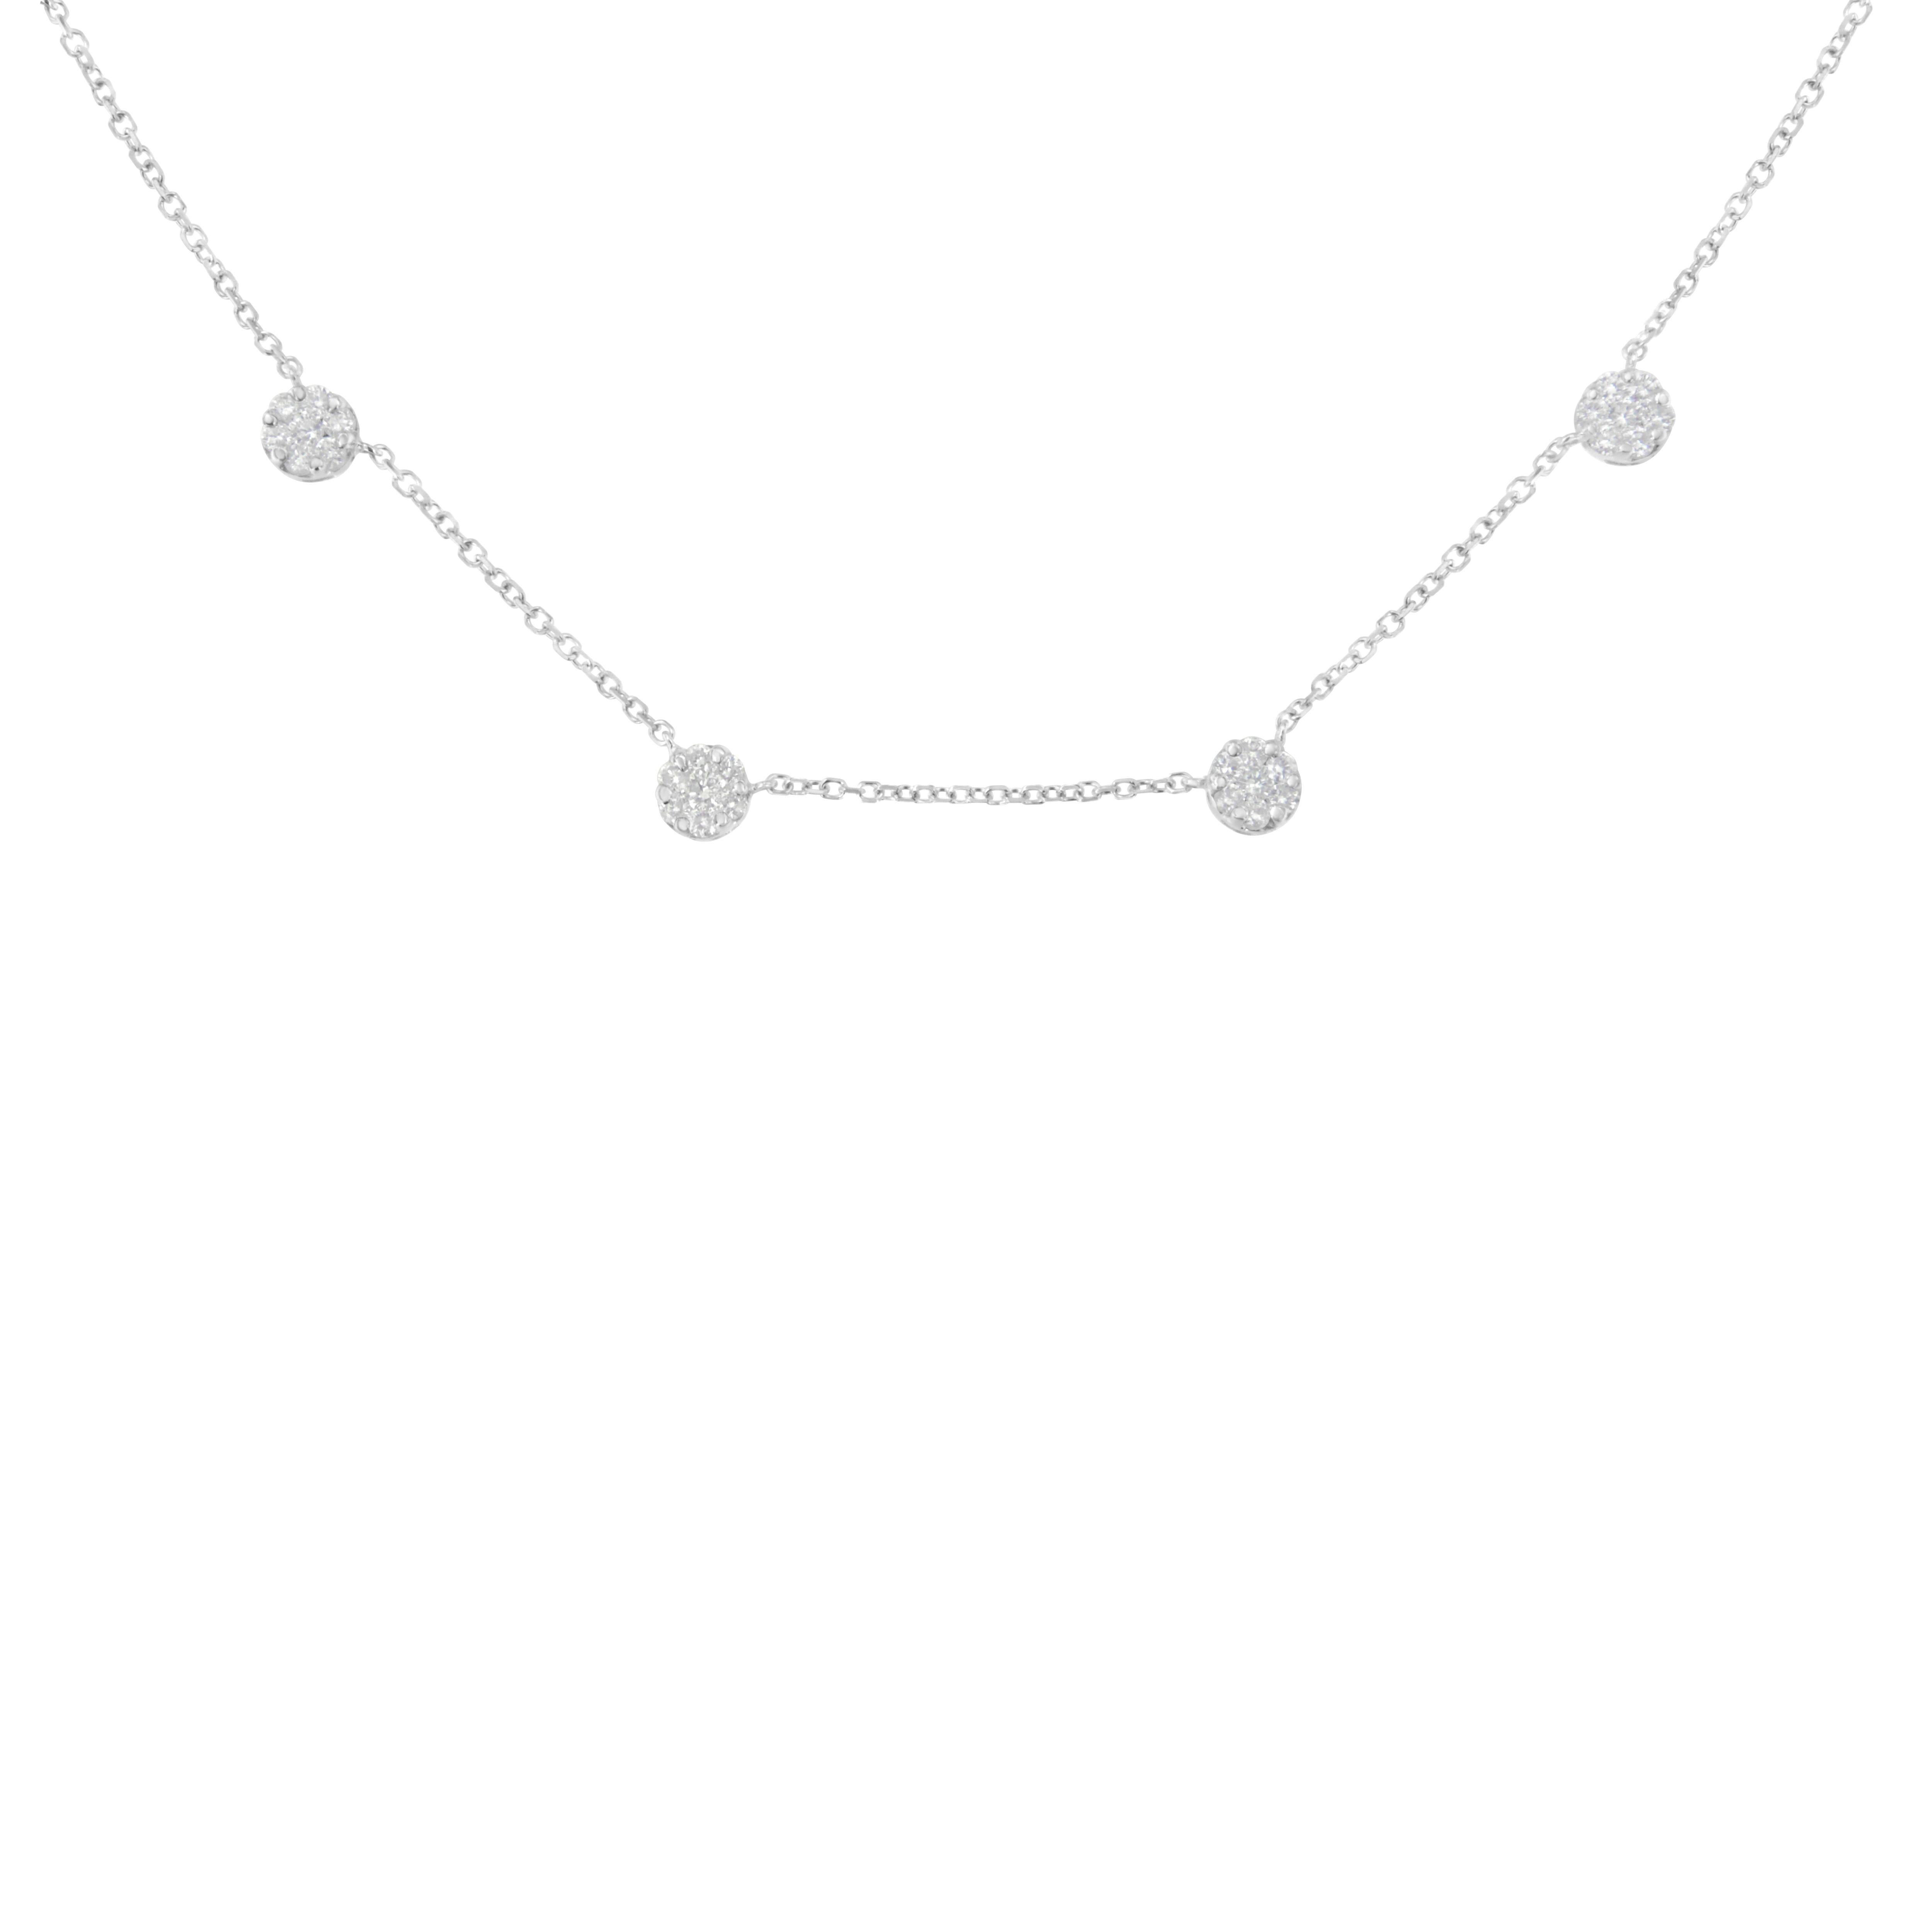 This delicate station necklace is created in 14k white gold and features 1 1/10ct TDW of diamonds. Four glittering, prong set, round cut diamond clusters are set along a box chain that secures with a lobster claw clasp. Adjustable 16-18